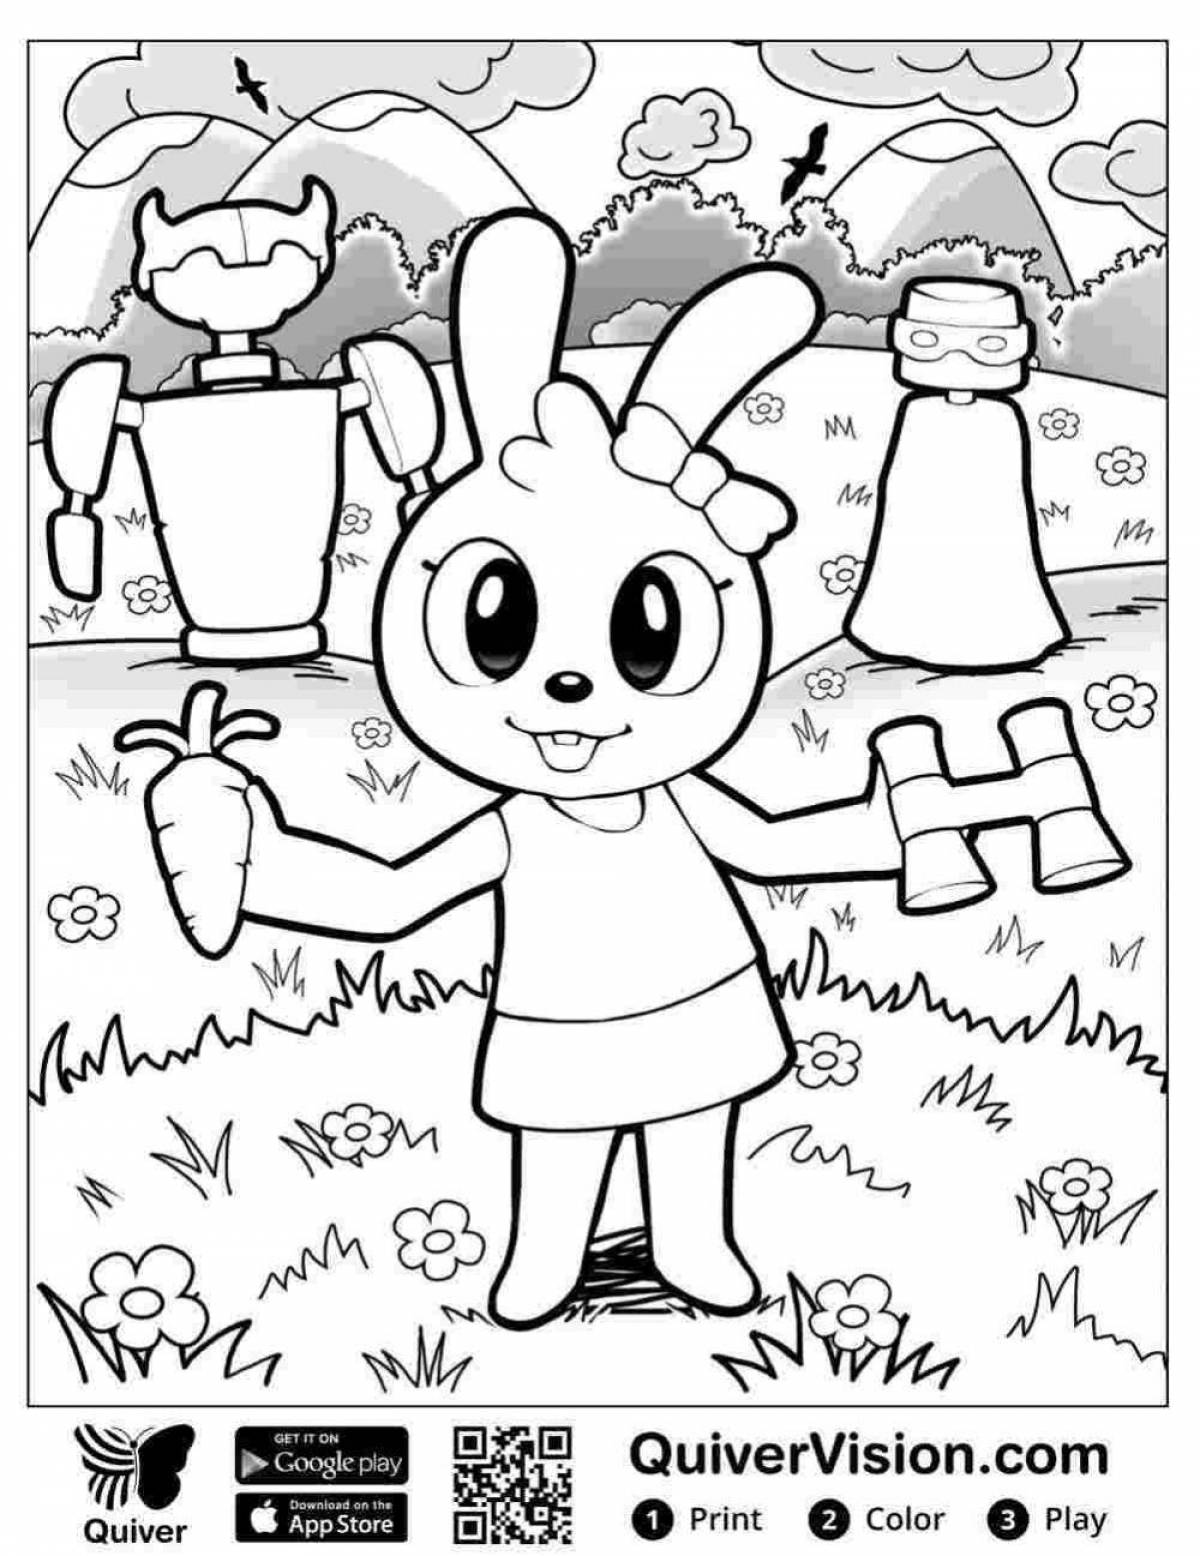 Great resurrection coloring book